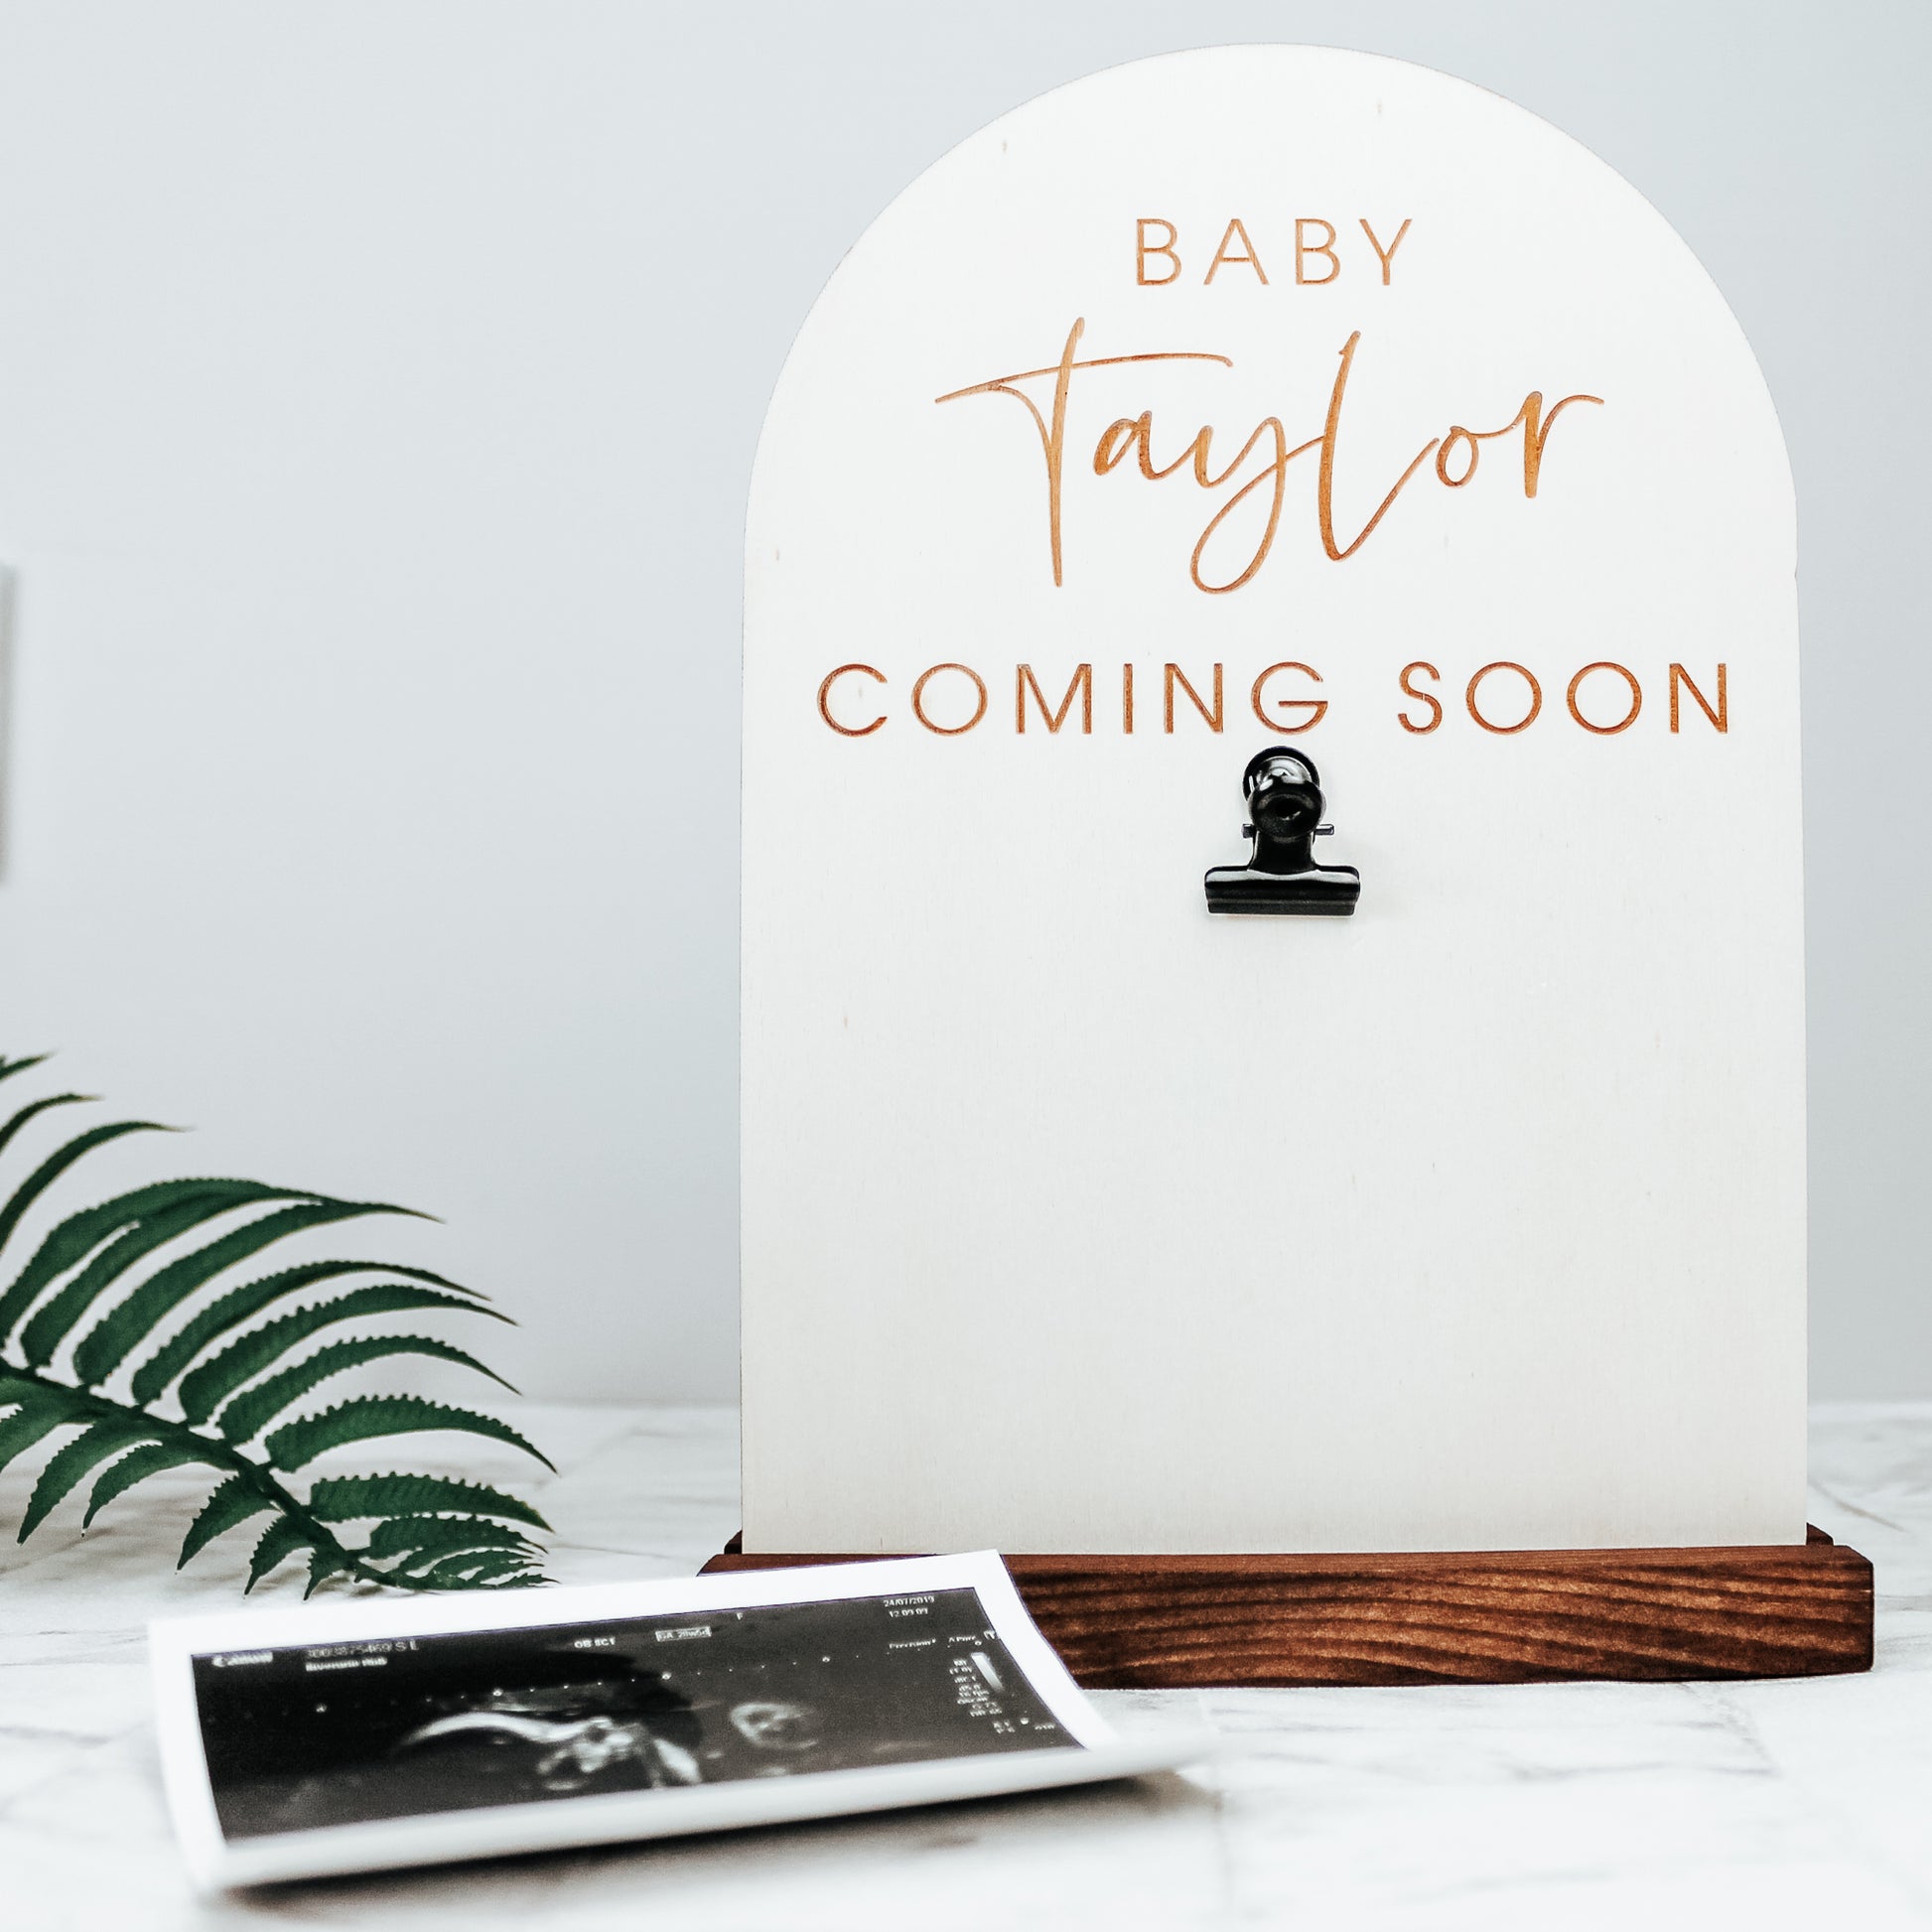 engraved and personalised wooden baby announcement sign - perfect for showing your new addition on social media